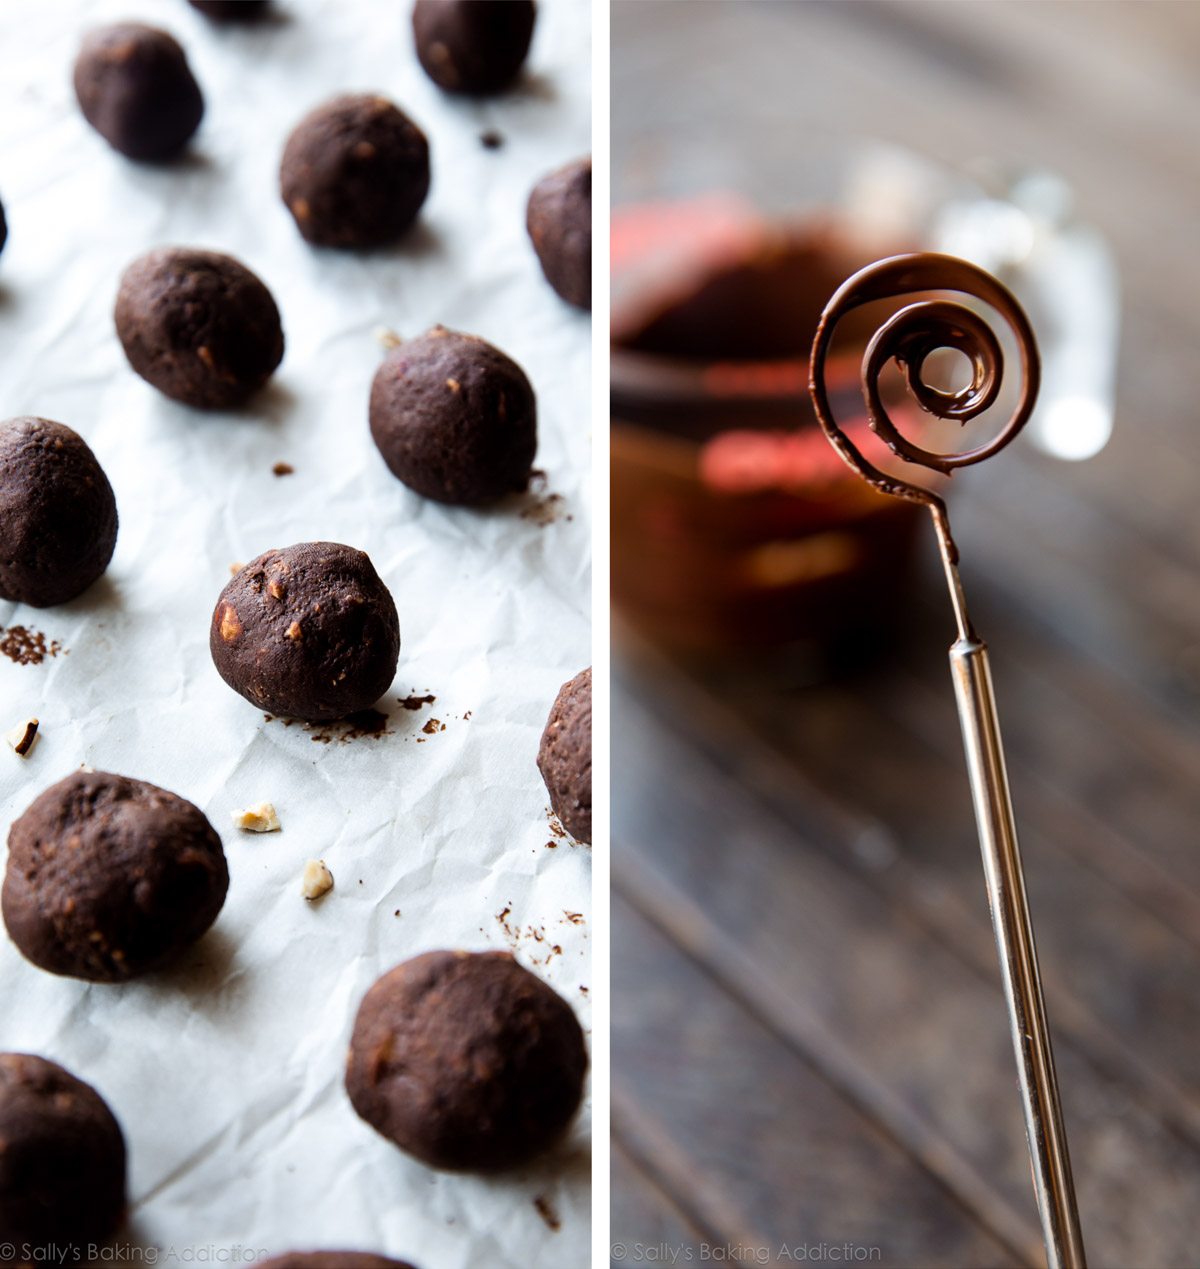 2 images of chocolate hazelnut truffle filling rolled into balls and a candy dipping tool